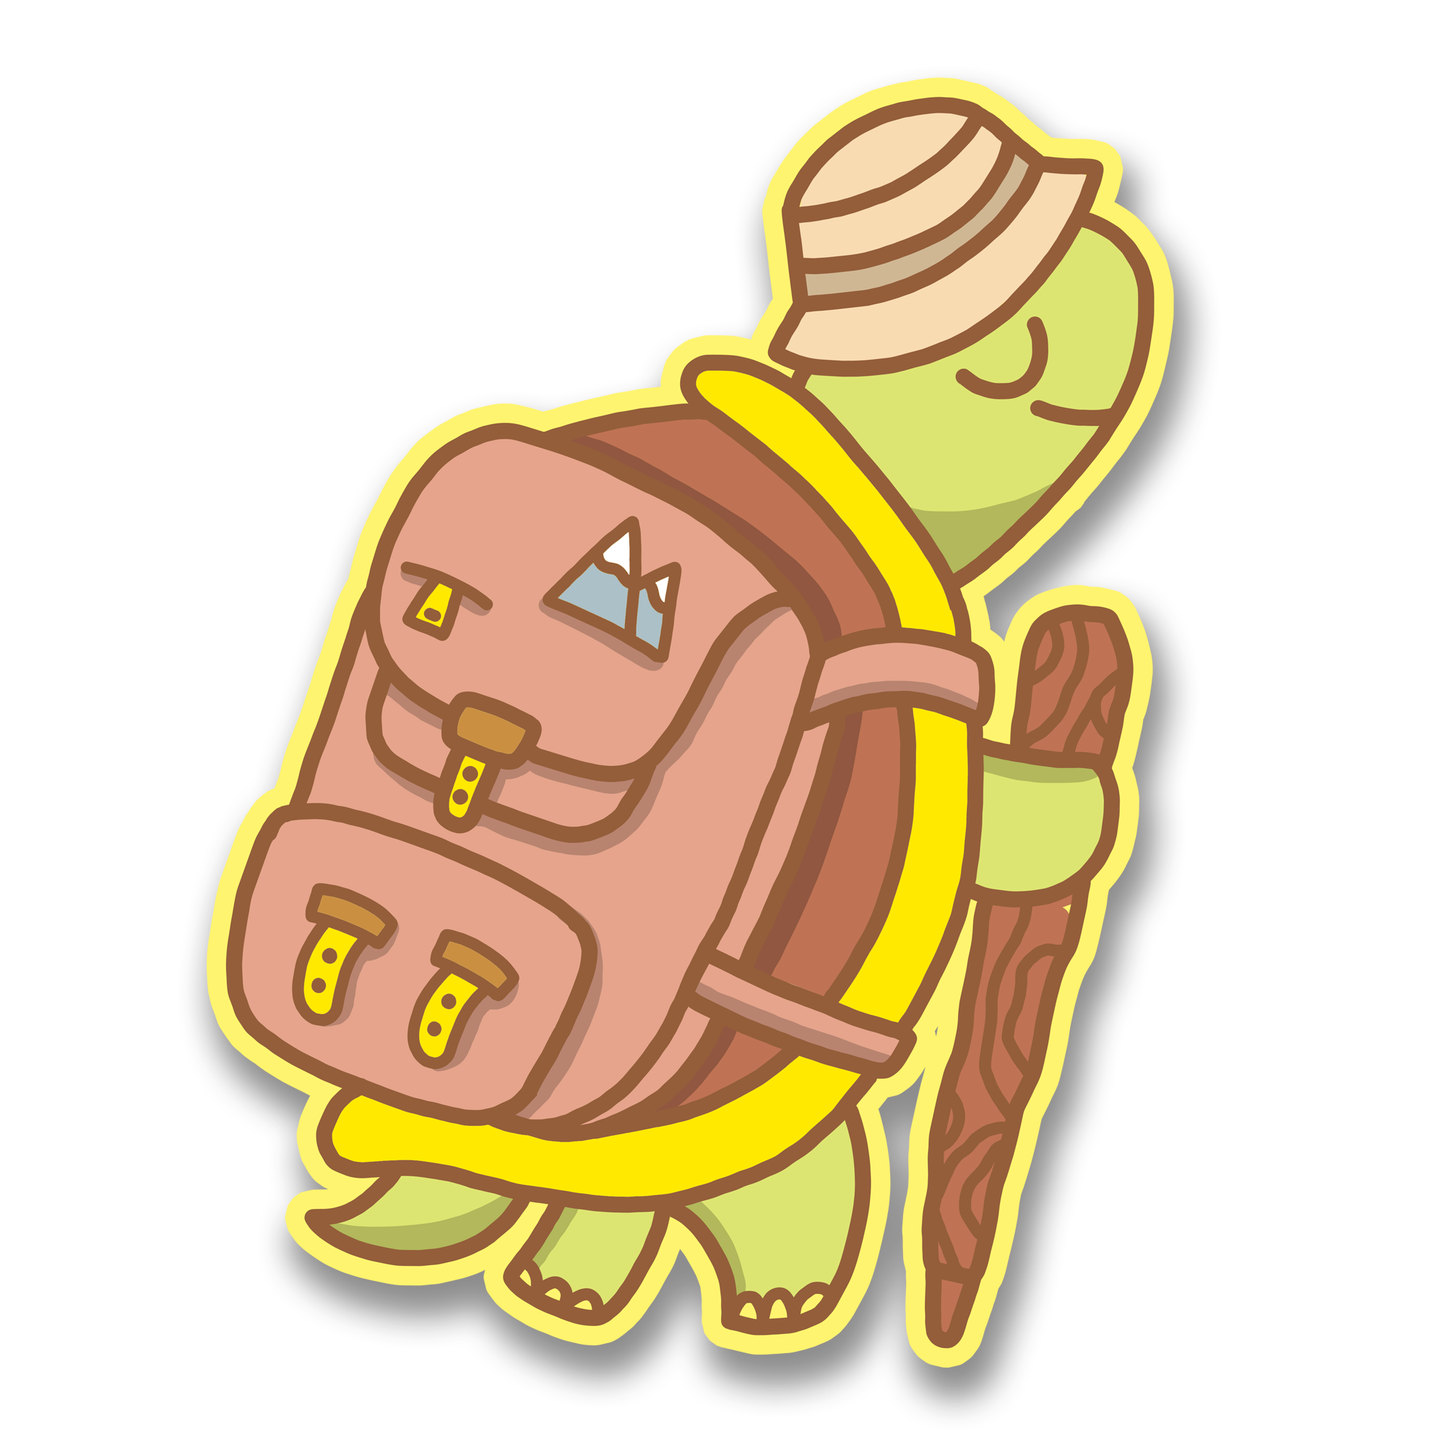 Hiking turtles sticker by Turtle's Soup